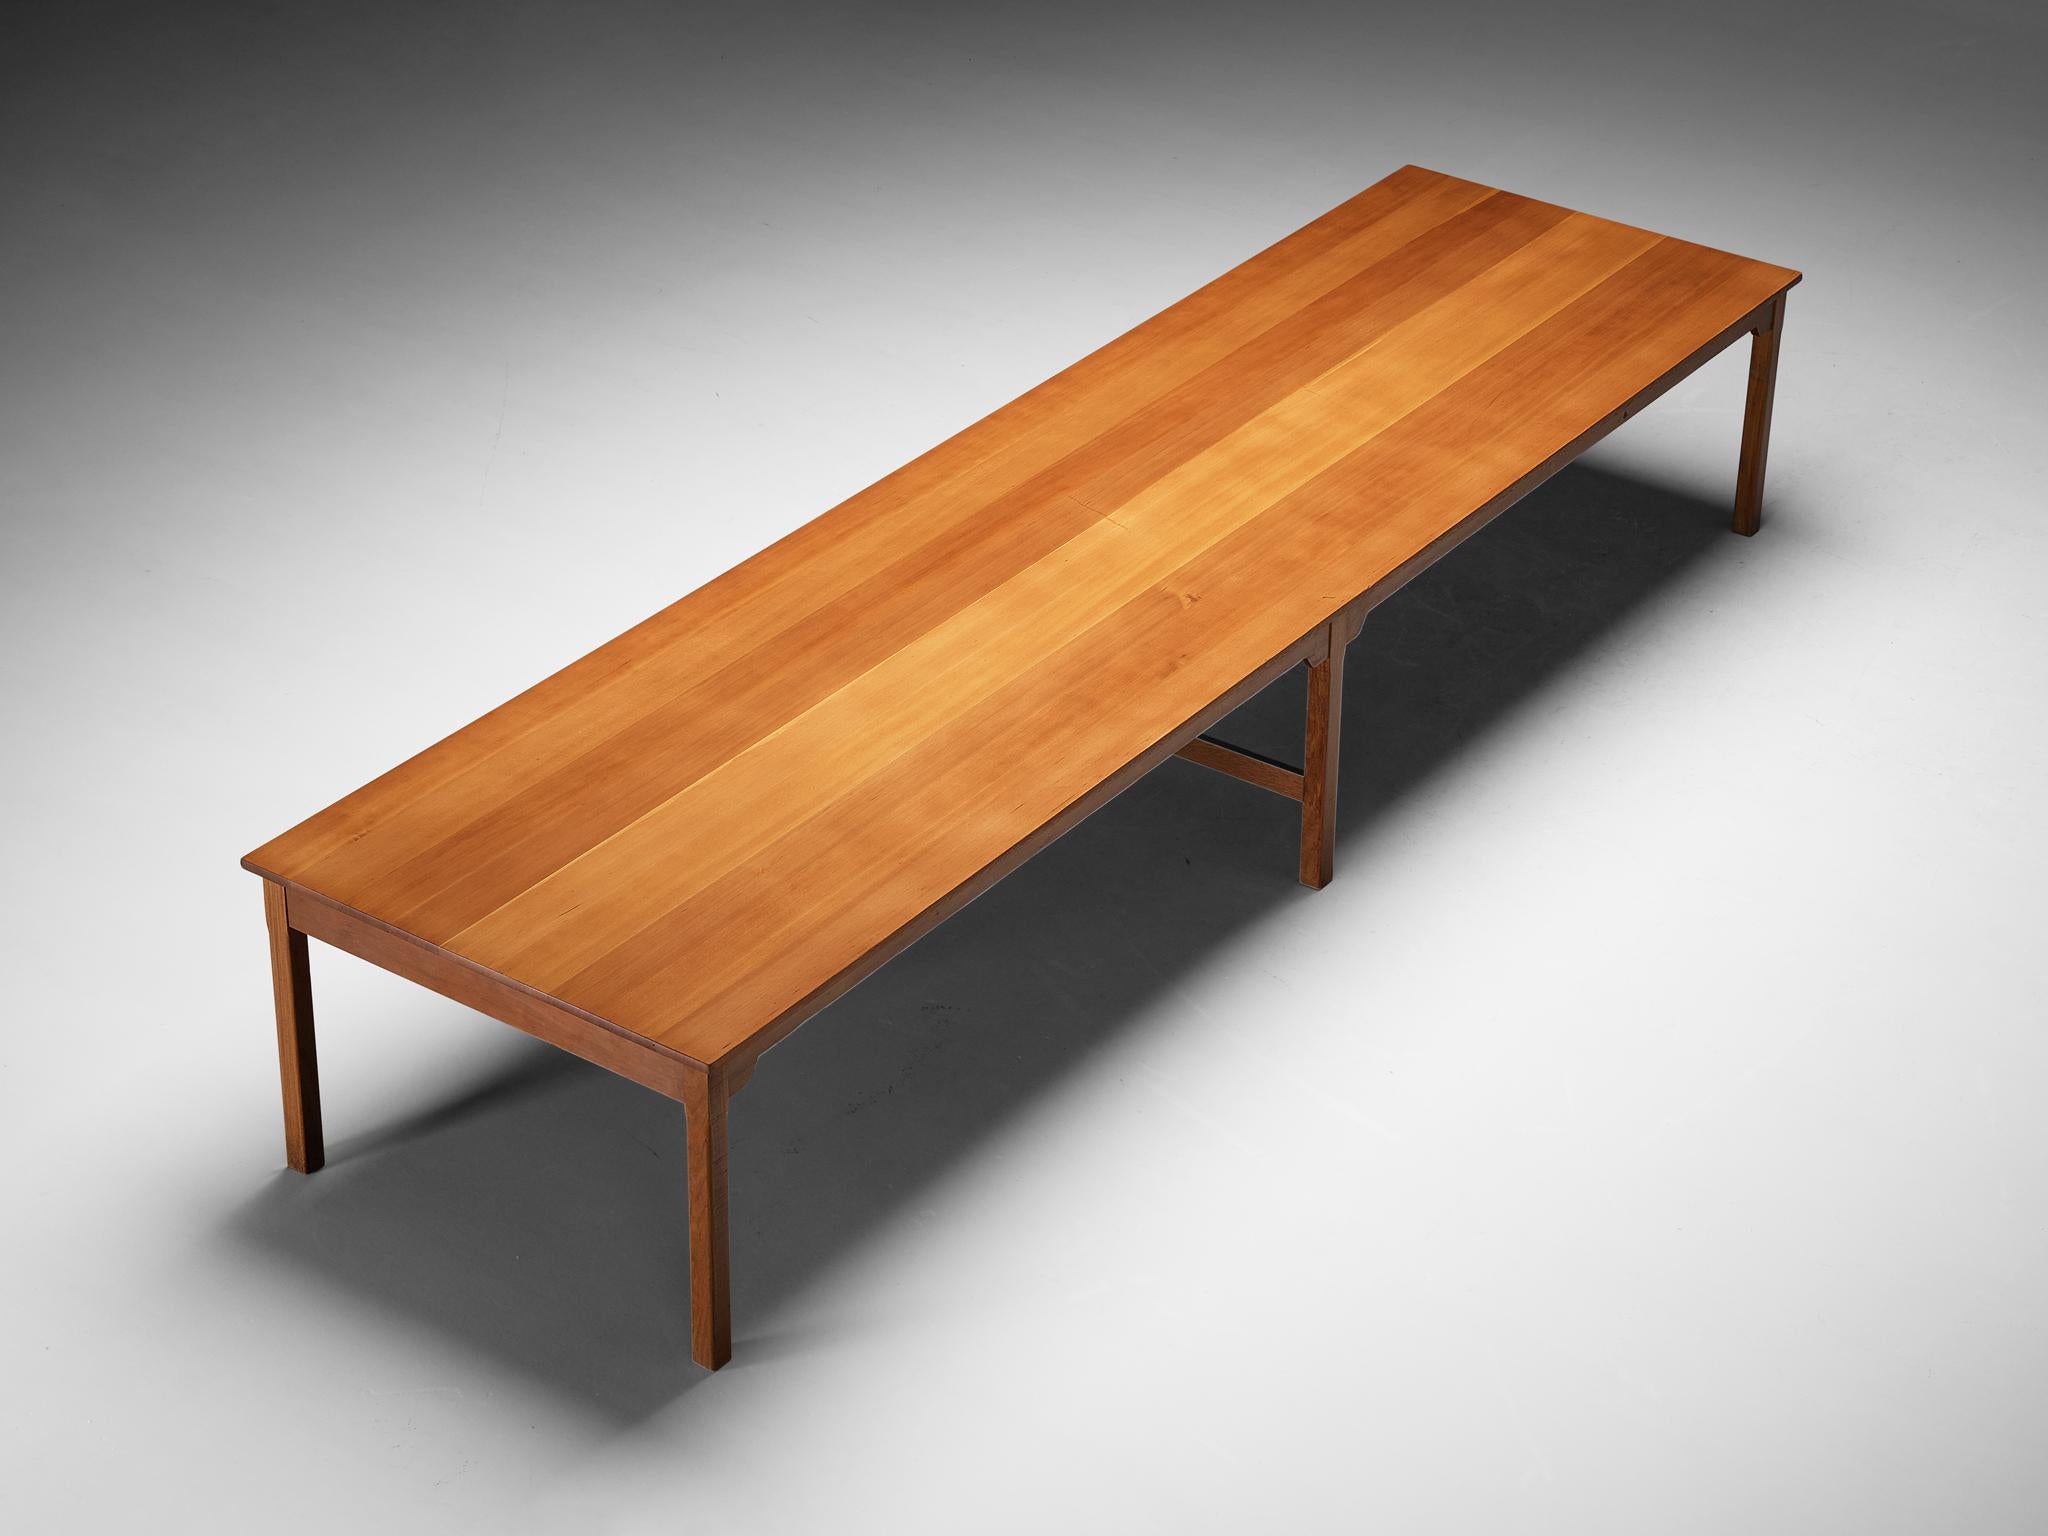 Conference or large dining table, Oregon pine, Denmark, 1960s 

Impressive in its size, this Danish table can be used in multiple settings. As a very large dining table to fit many relatives or friends, or as a conference table in an office setting.